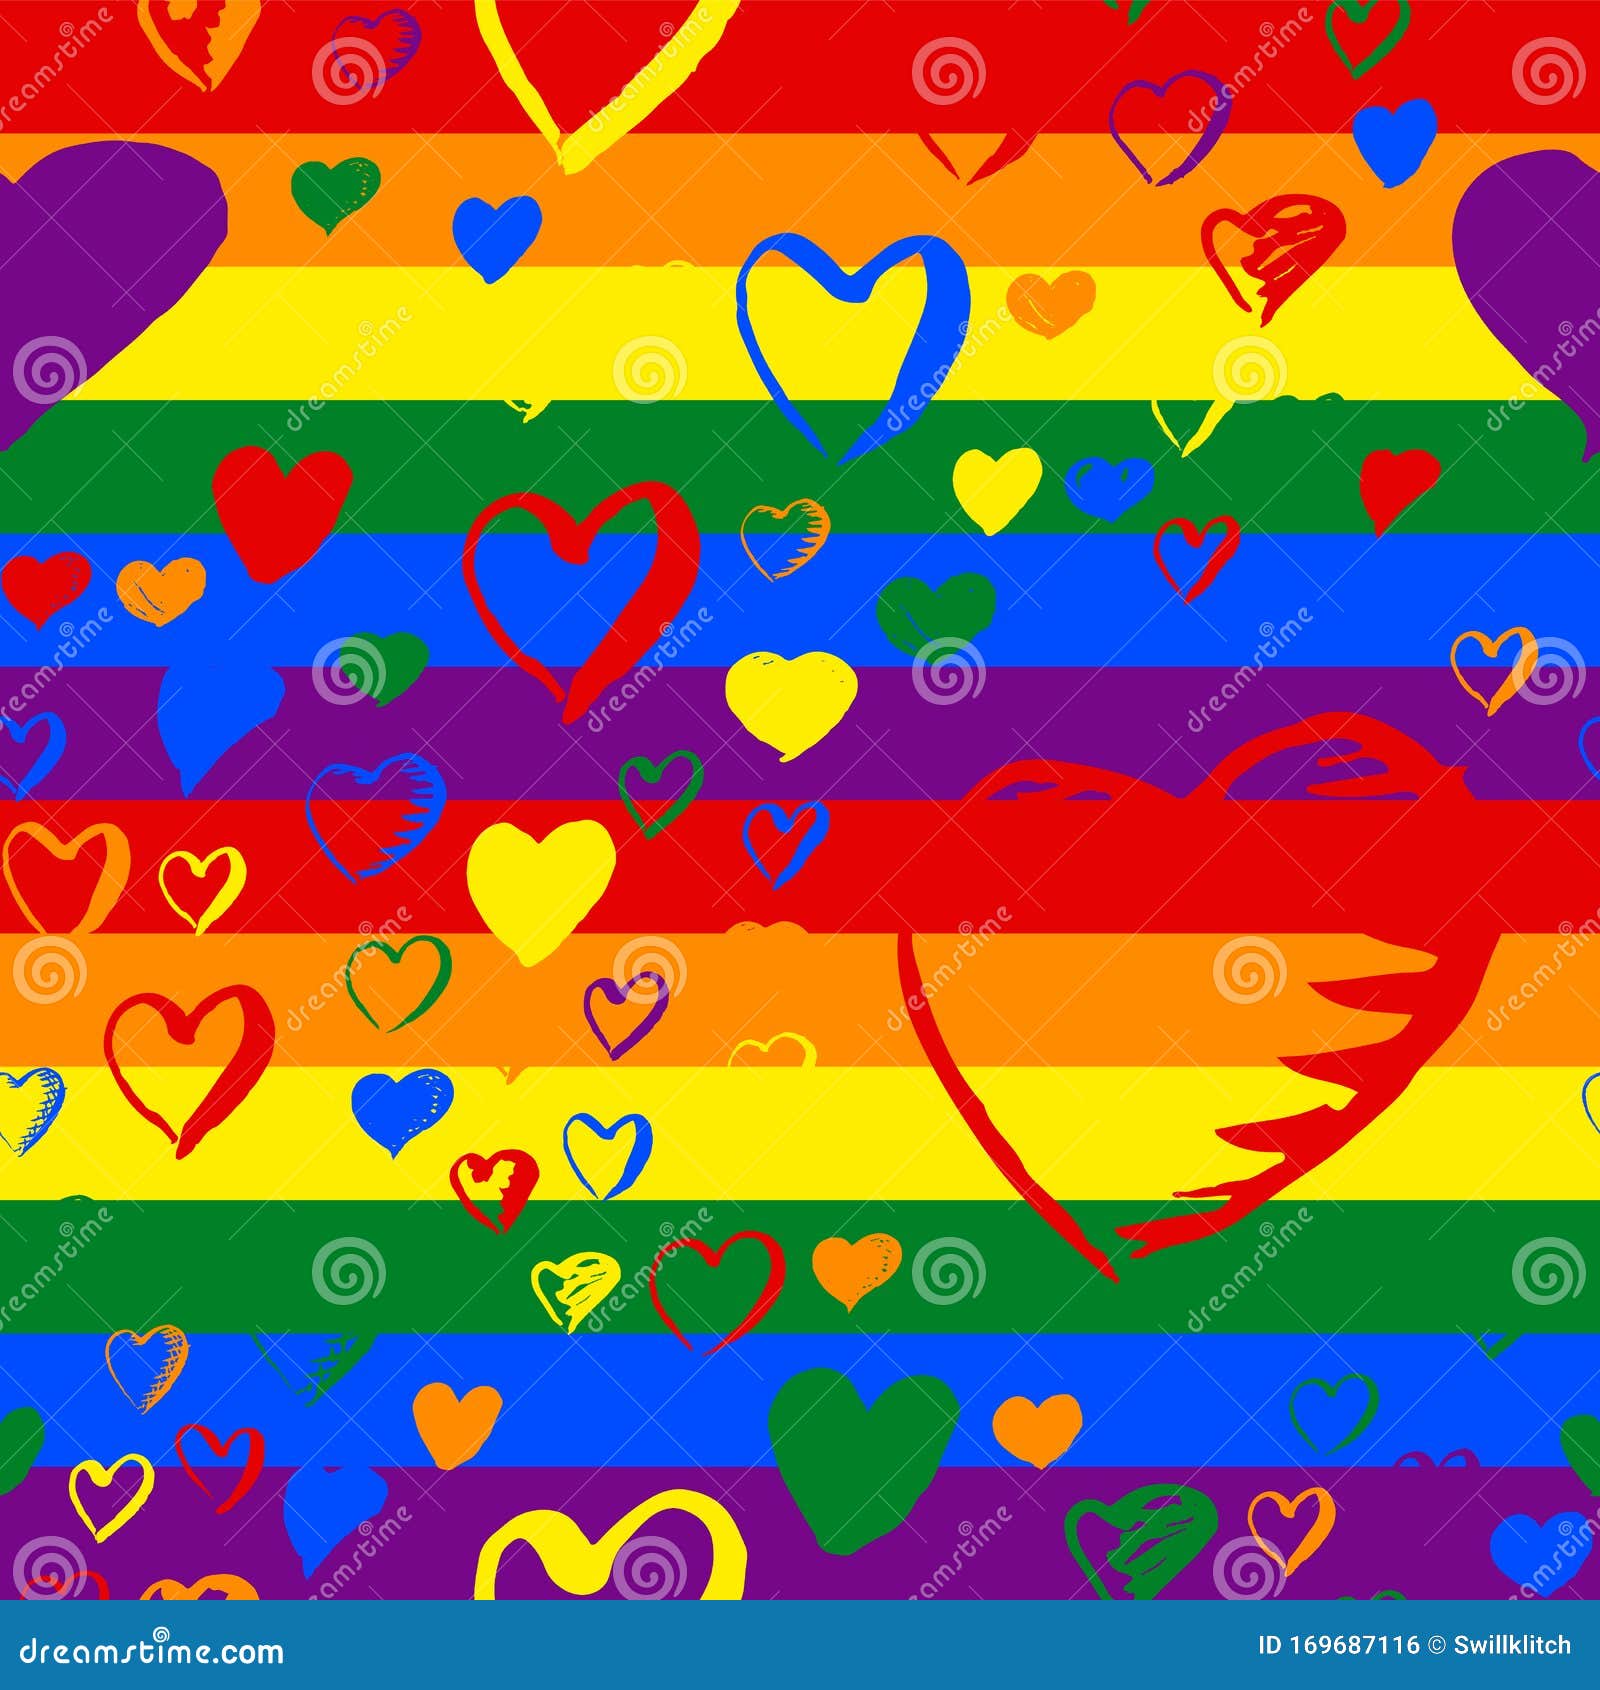 gay pride rainbow colored pattern with hearts